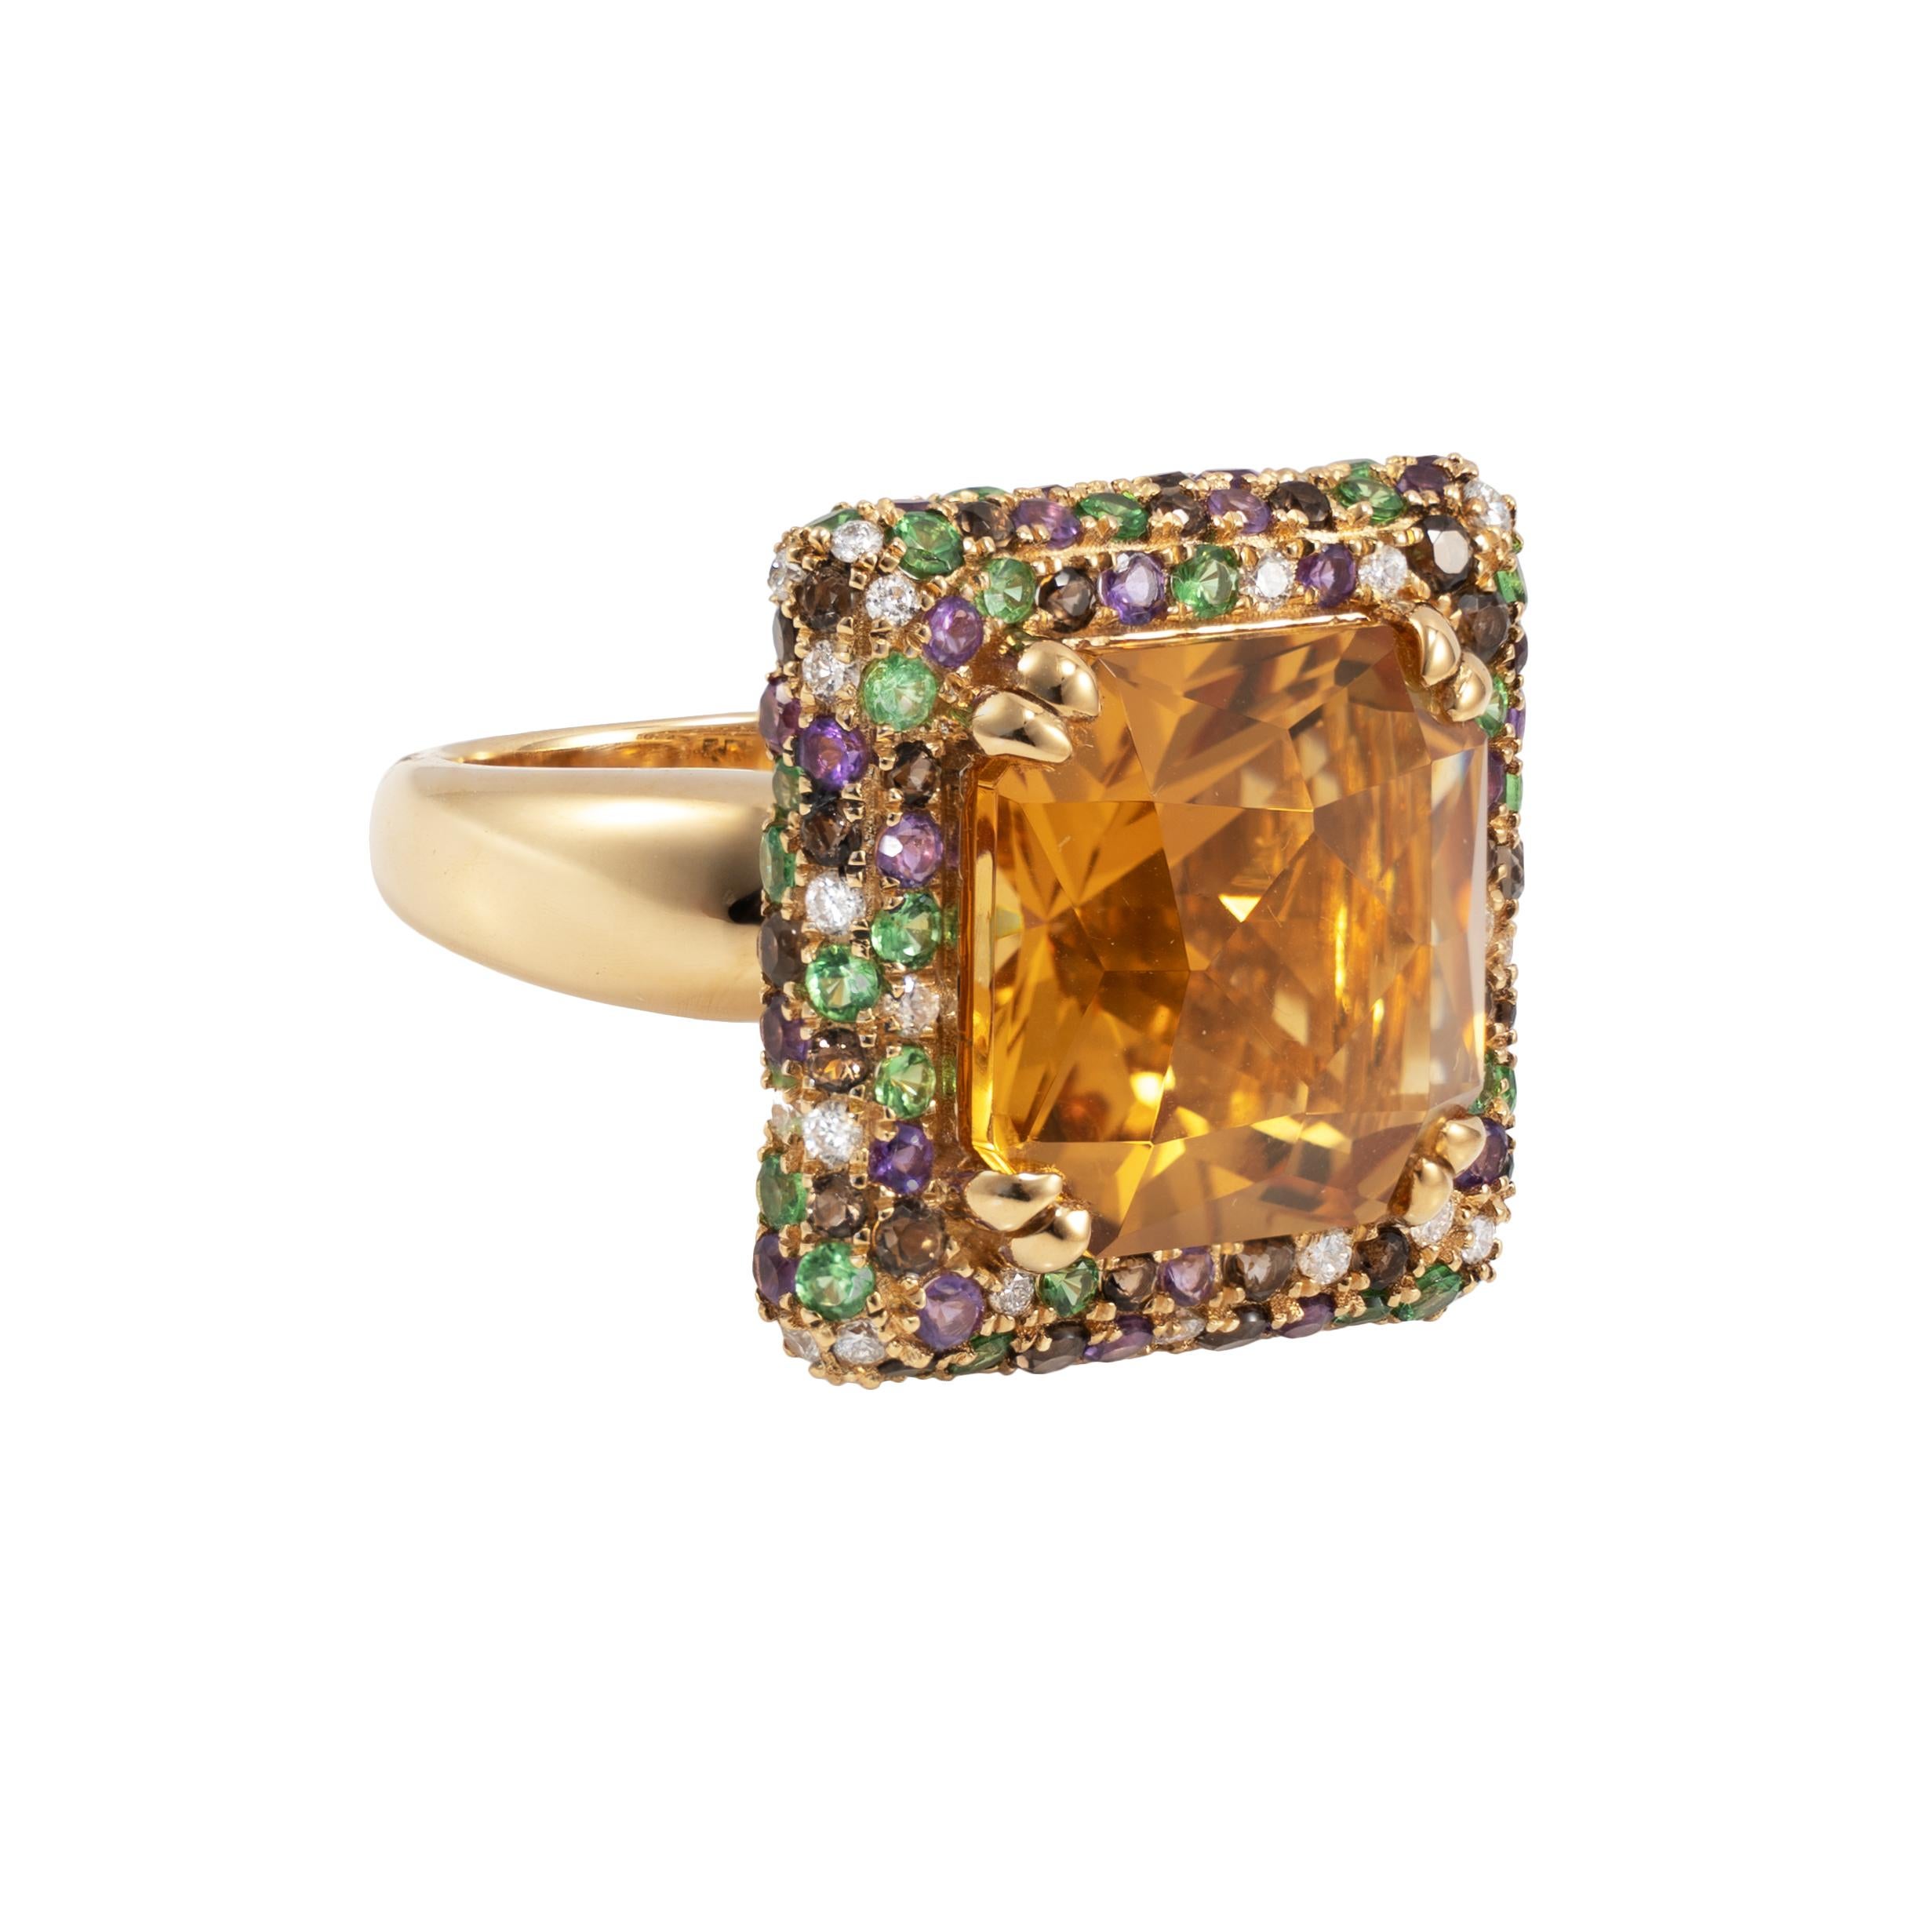 Sunita Nahata presents a collection of bold and colorful cocktail rings. This ring features a vibrant citrine in a square emerald cut. The citrine is surrounded by a frame of smoky quartz, tsavorite, amethyst, and diamonds. 

Citrine Cocktail Ring